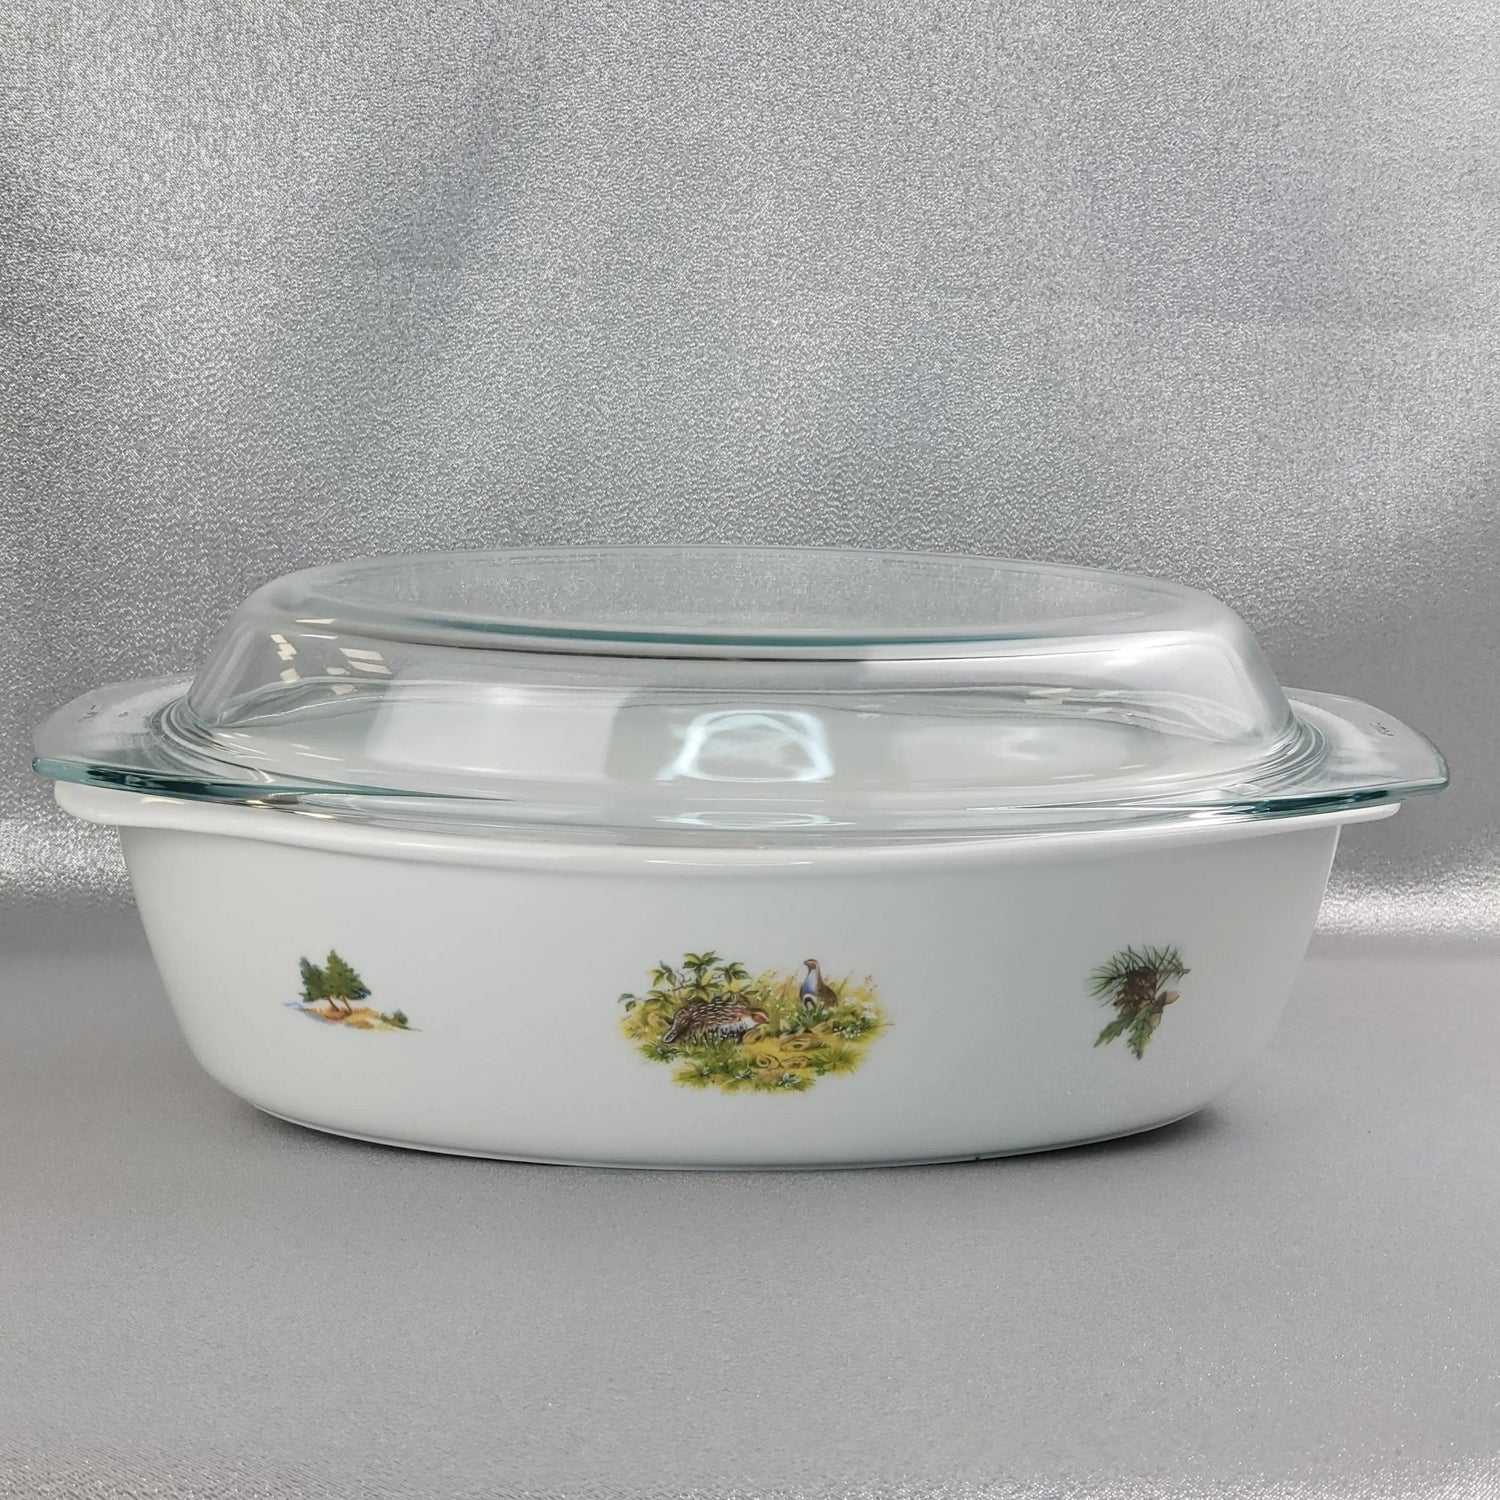 Oven-to-Table Porcelain Casserole Dish